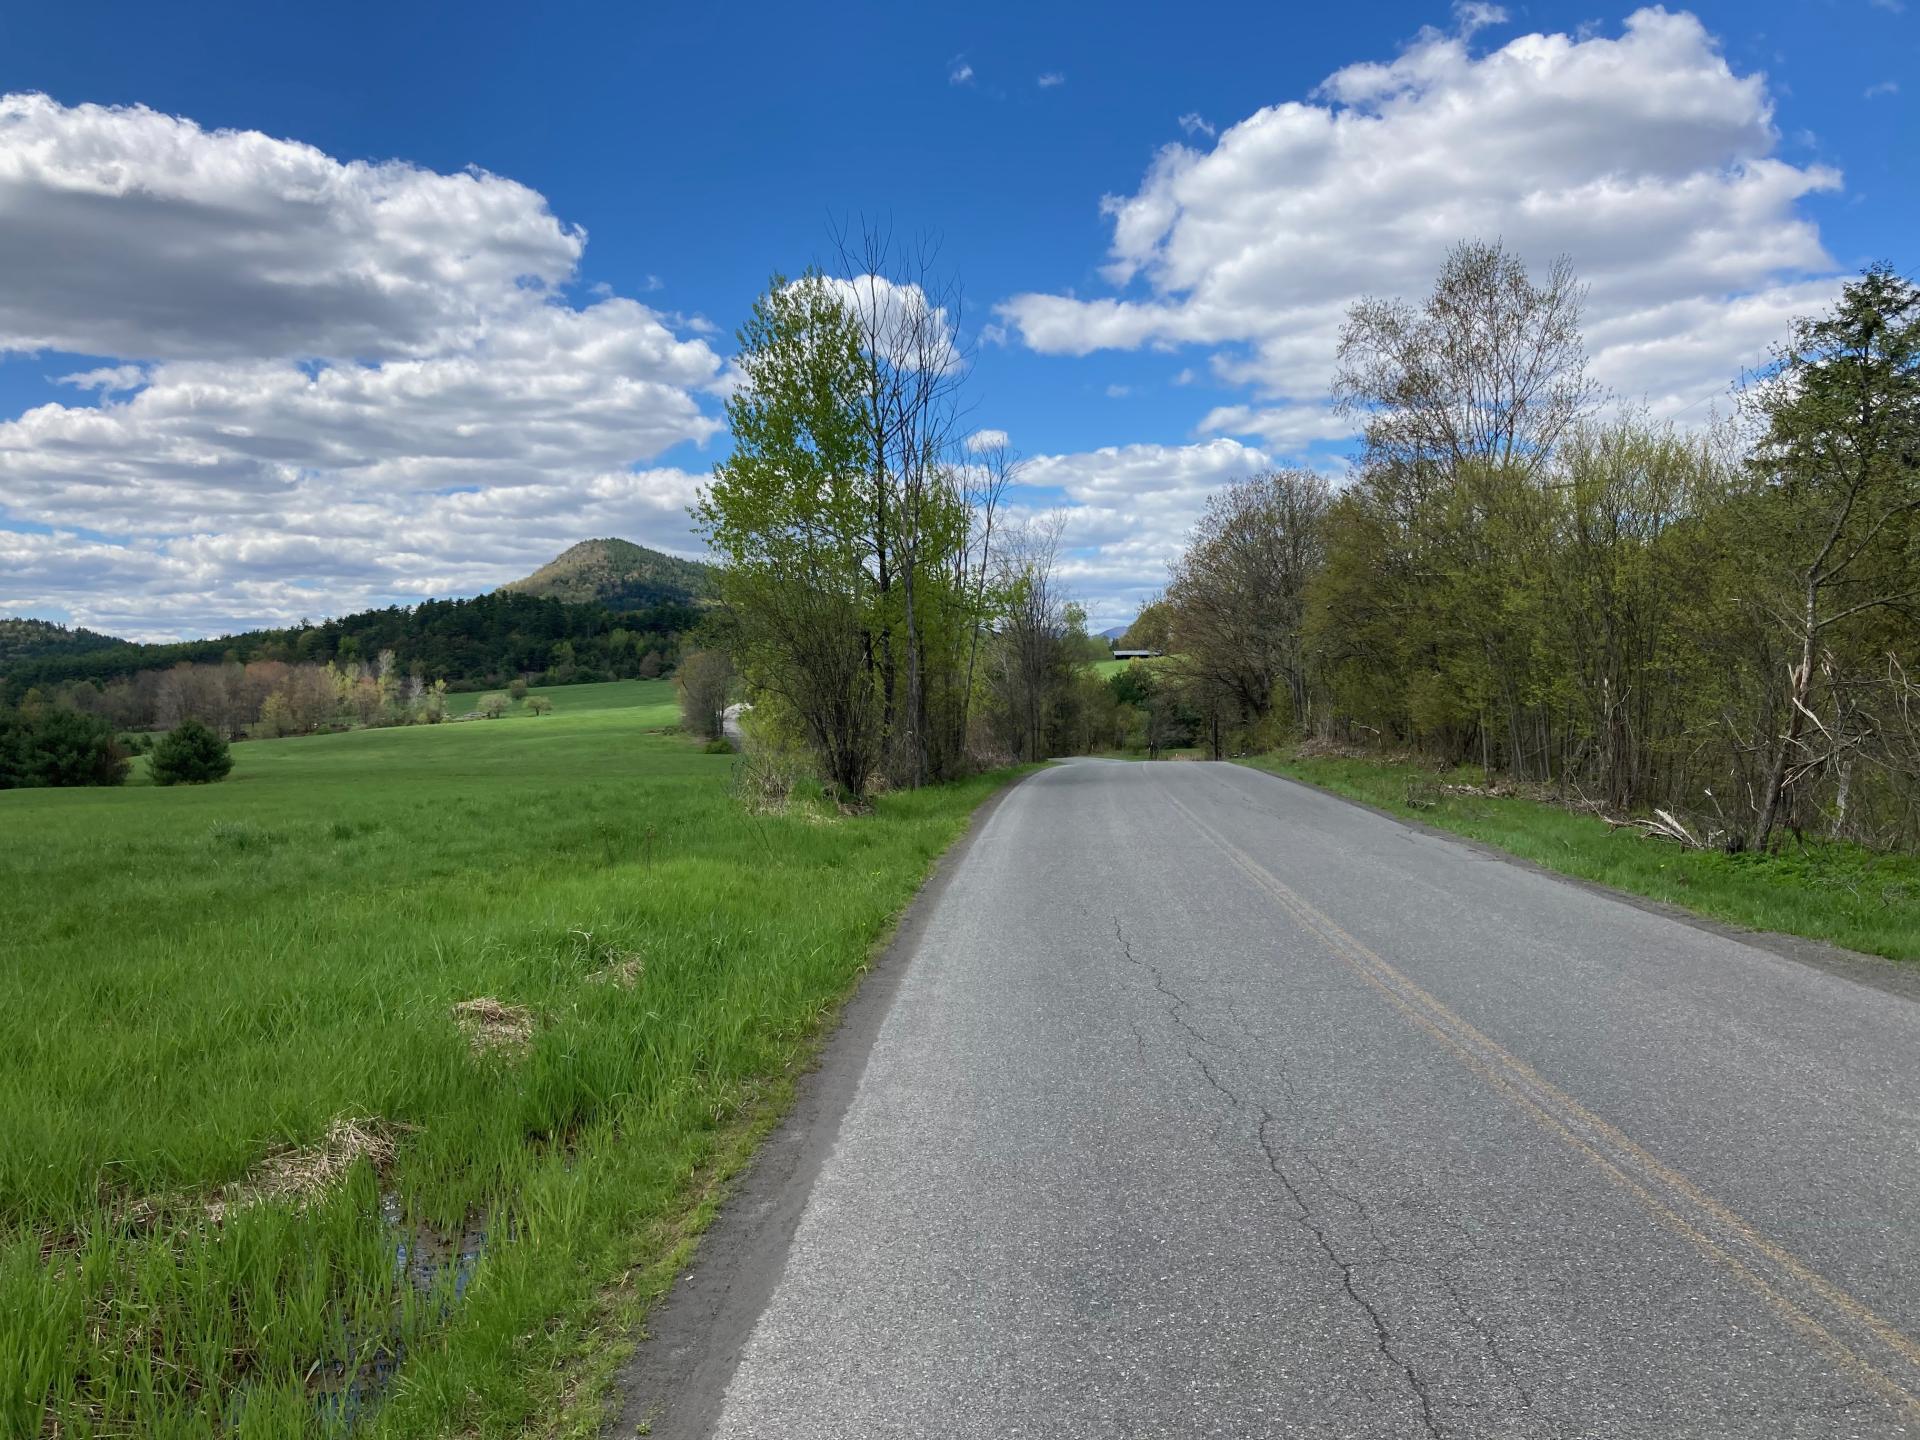 An open road surrounded by greenery and a mountain in the background. 